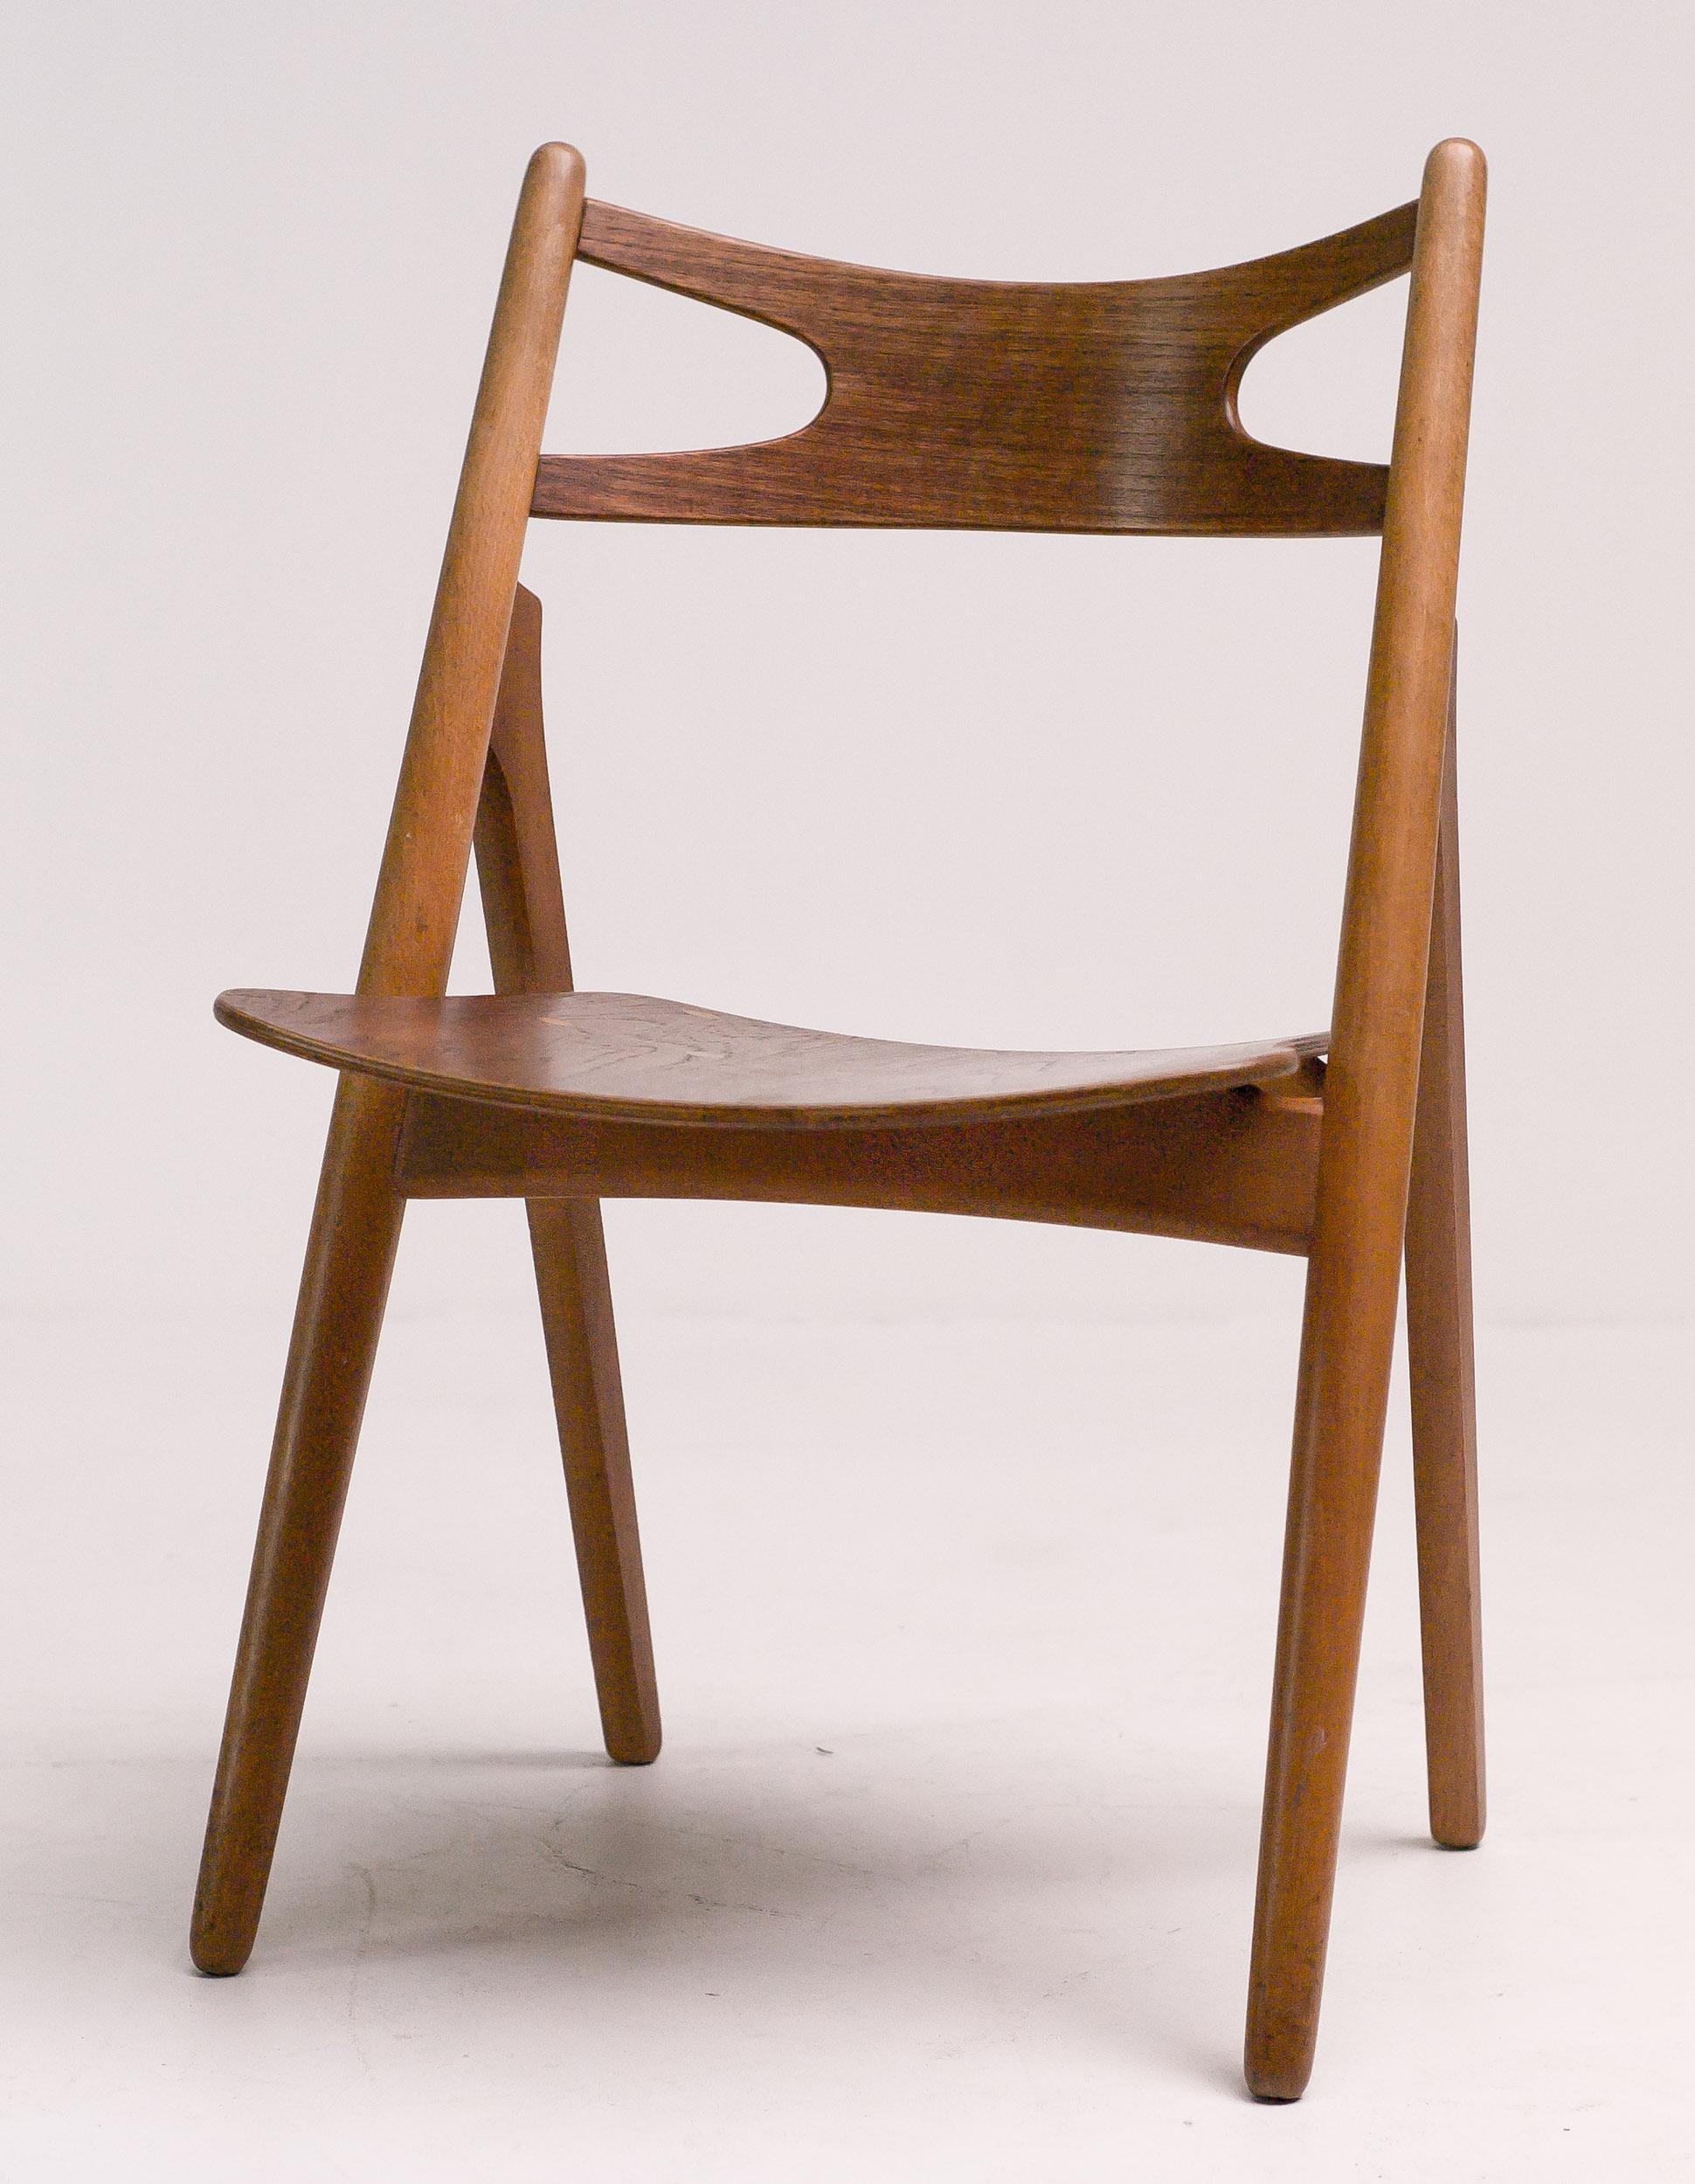 Hans J. Wegner for Carl Hansen & Søn, set of four 'Sawbuck' CH29 chairs, teak, Denmark, 1952. 
This set of four chairs is designed by Hans J. Wegner for Carl Hansen. 
This is the most desirable version with visible seat construction.
The table is